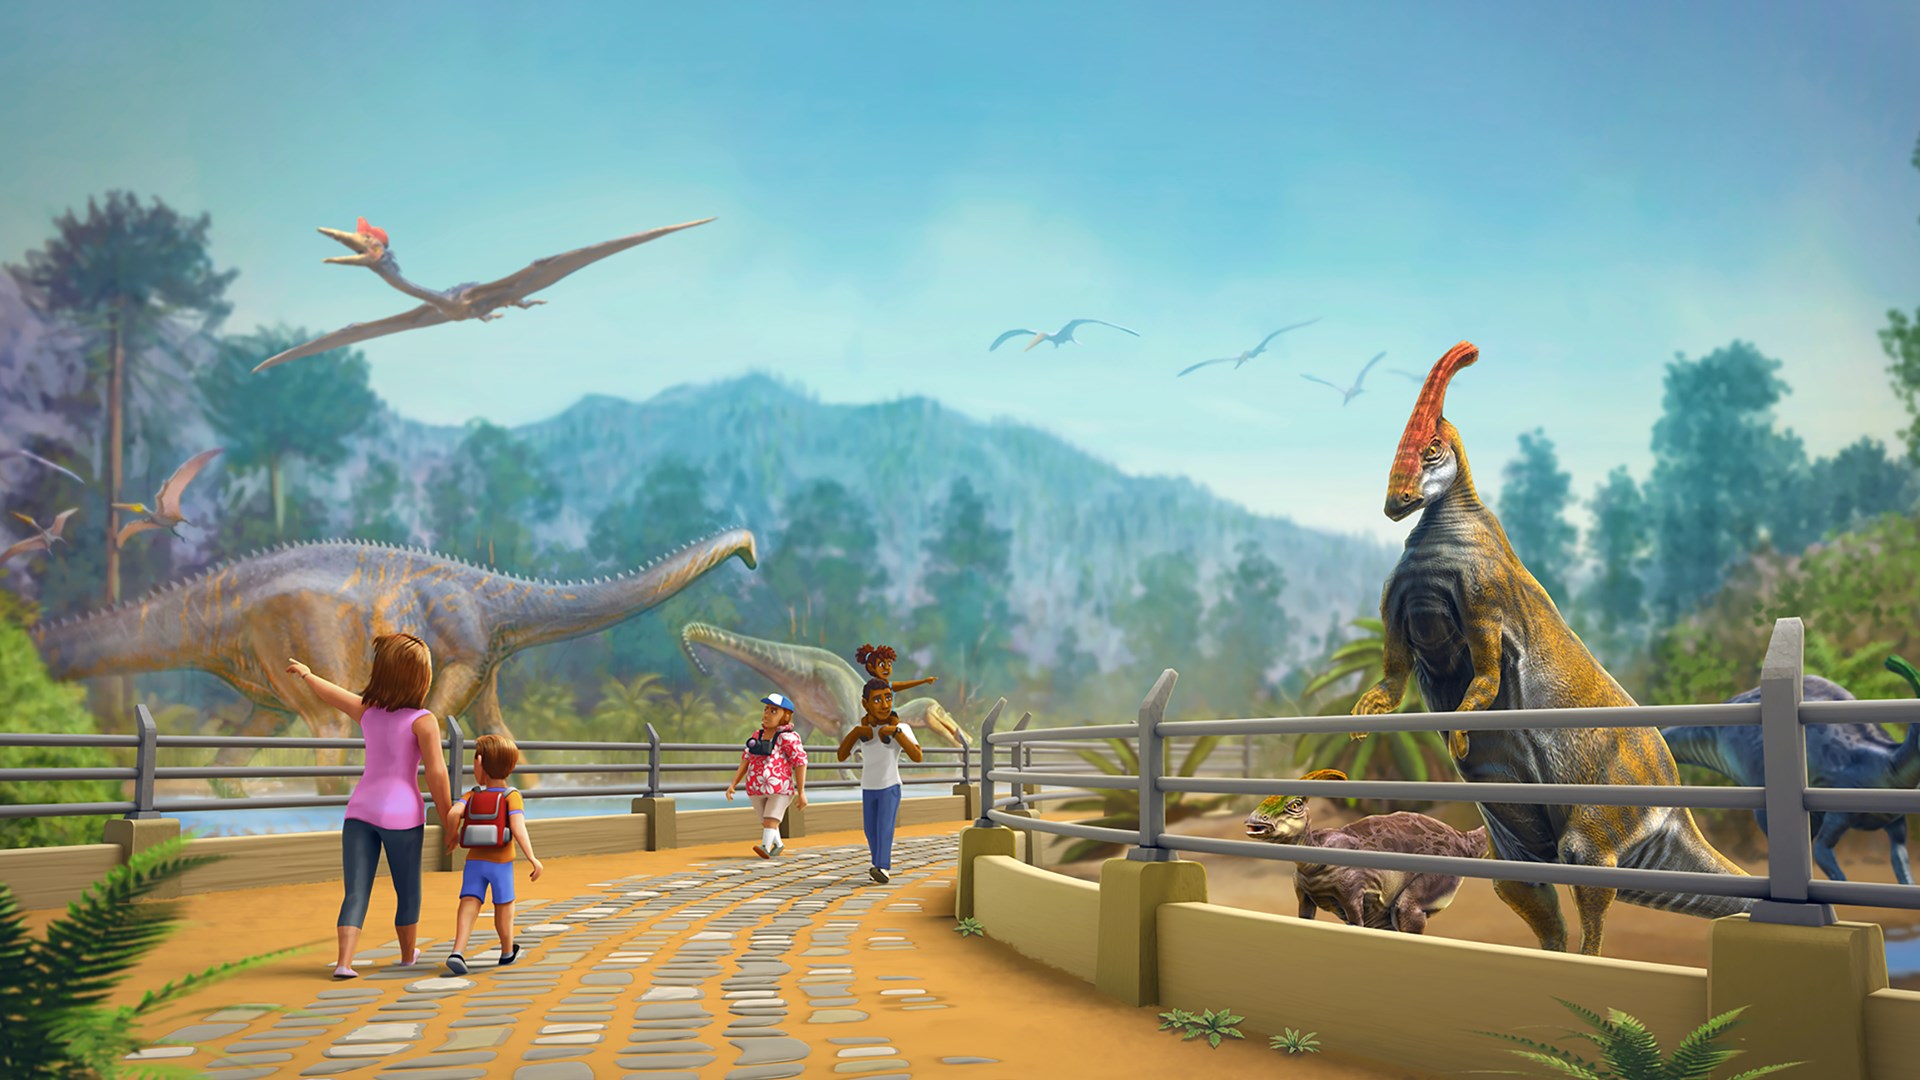 Play Dinosaur games for toddlers Online for Free on PC & Mobile